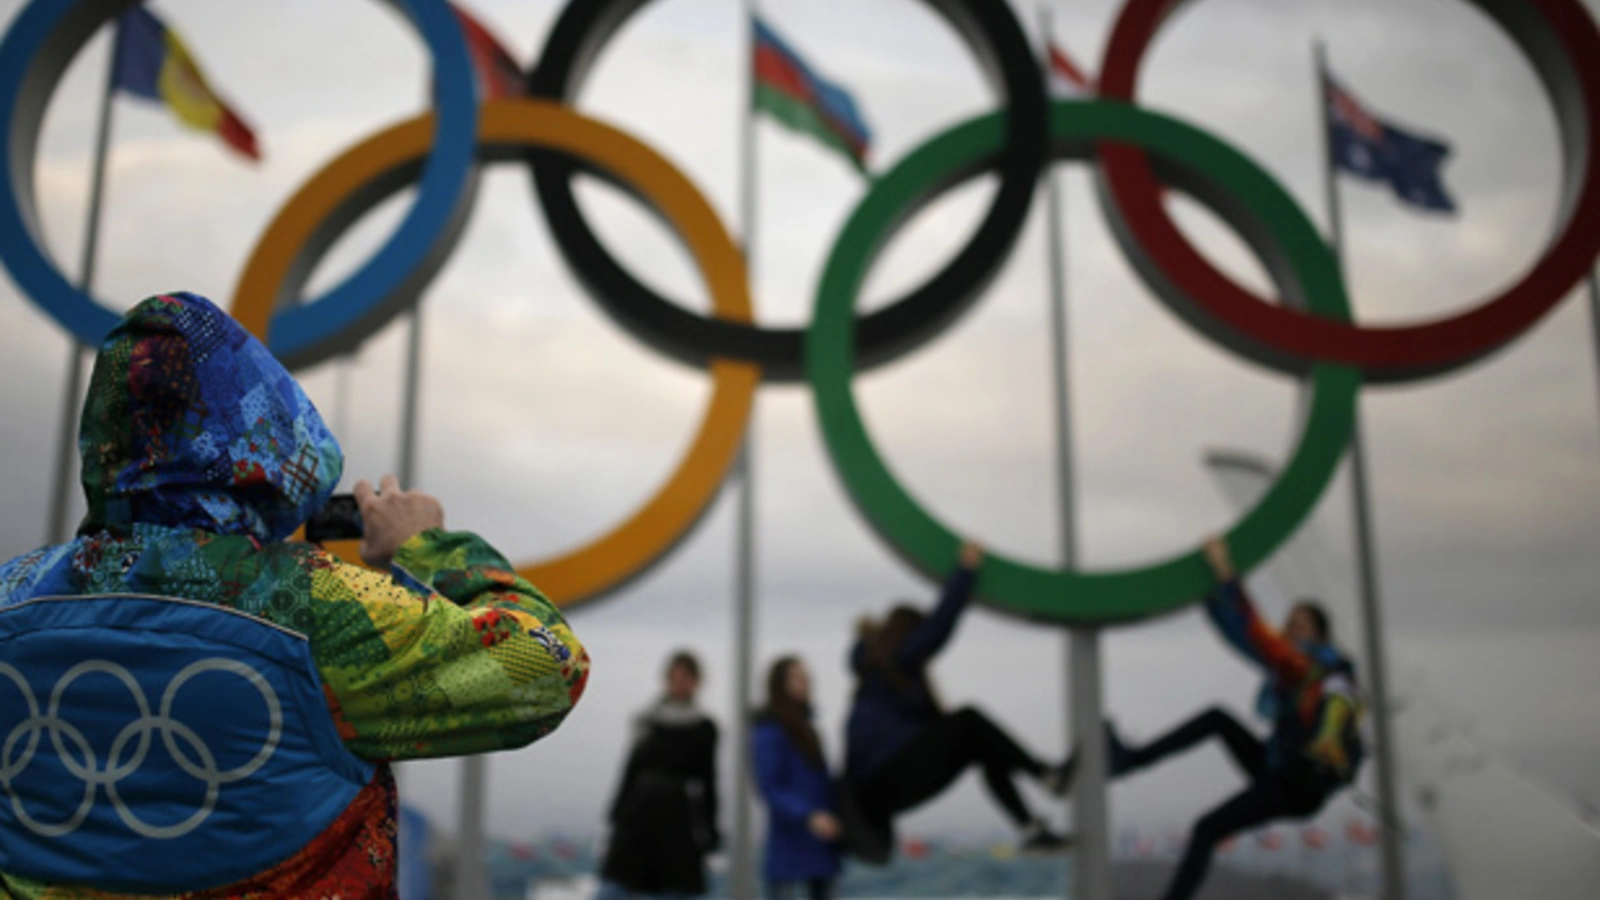 Winter olympics google doodle takes stand for gay rights